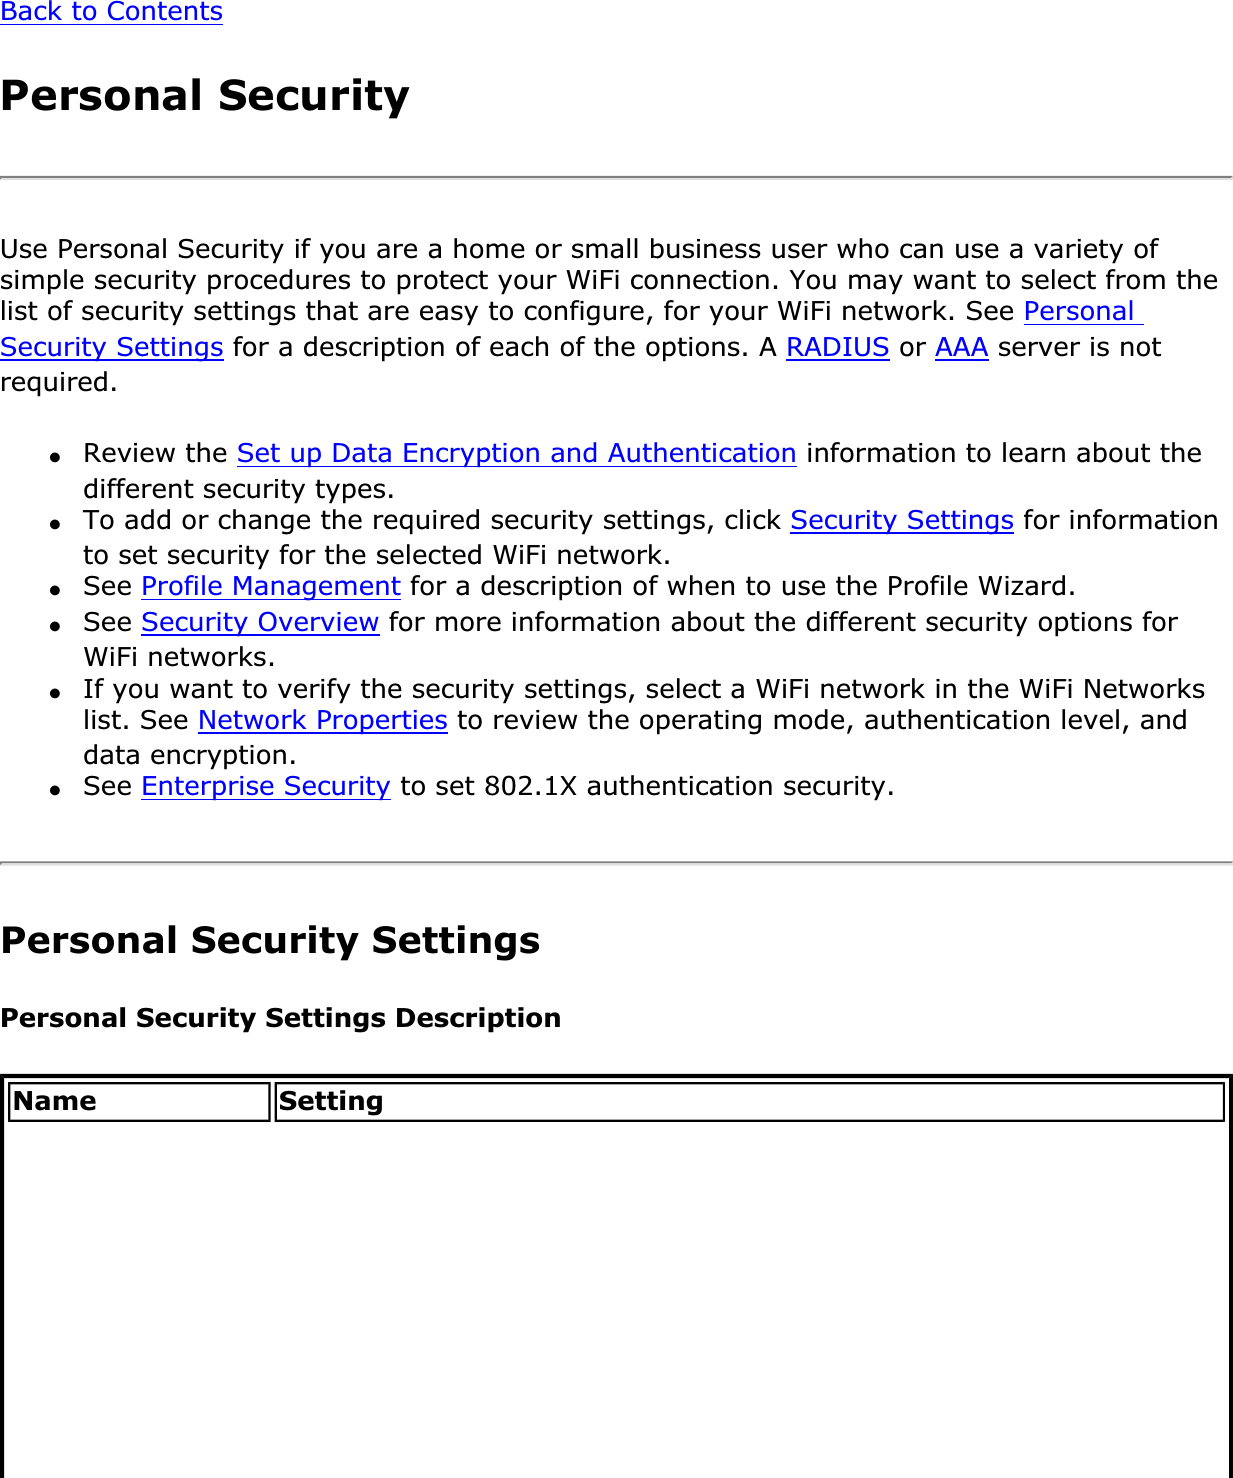 Back to ContentsPersonal SecurityUse Personal Security if you are a home or small business user who can use a variety of simple security procedures to protect your WiFi connection. You may want to select from the list of security settings that are easy to configure, for your WiFi network. See PersonalSecurity Settings for a description of each of the options. A RADIUS or AAA server is not required.●Review the Set up Data Encryption and Authentication information to learn about the different security types.●To add or change the required security settings, click Security Settings for information to set security for the selected WiFi network.●See Profile Management for a description of when to use the Profile Wizard.●See Security Overview for more information about the different security options for WiFi networks.●If you want to verify the security settings, select a WiFi network in the WiFi Networks list. See Network Properties to review the operating mode, authentication level, and data encryption.●See Enterprise Security to set 802.1X authentication security.Personal Security SettingsPersonal Security Settings DescriptionName Setting